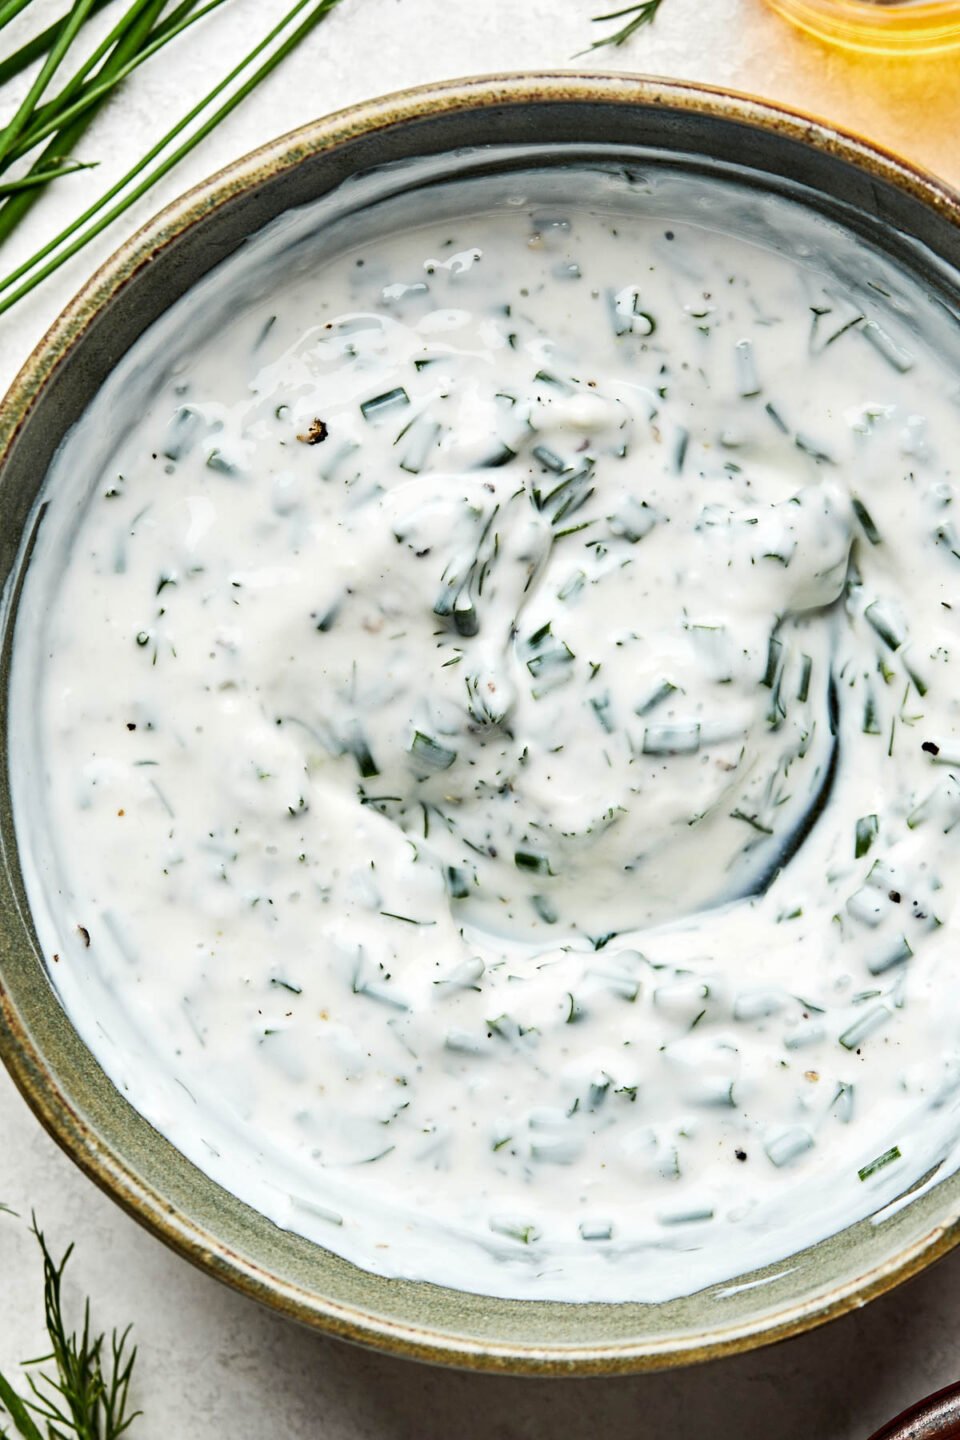 A close-up overhead shot of a bowl of ranch dip atop a white marbled surface. Fresh chives and dill sit alongside the bowl.